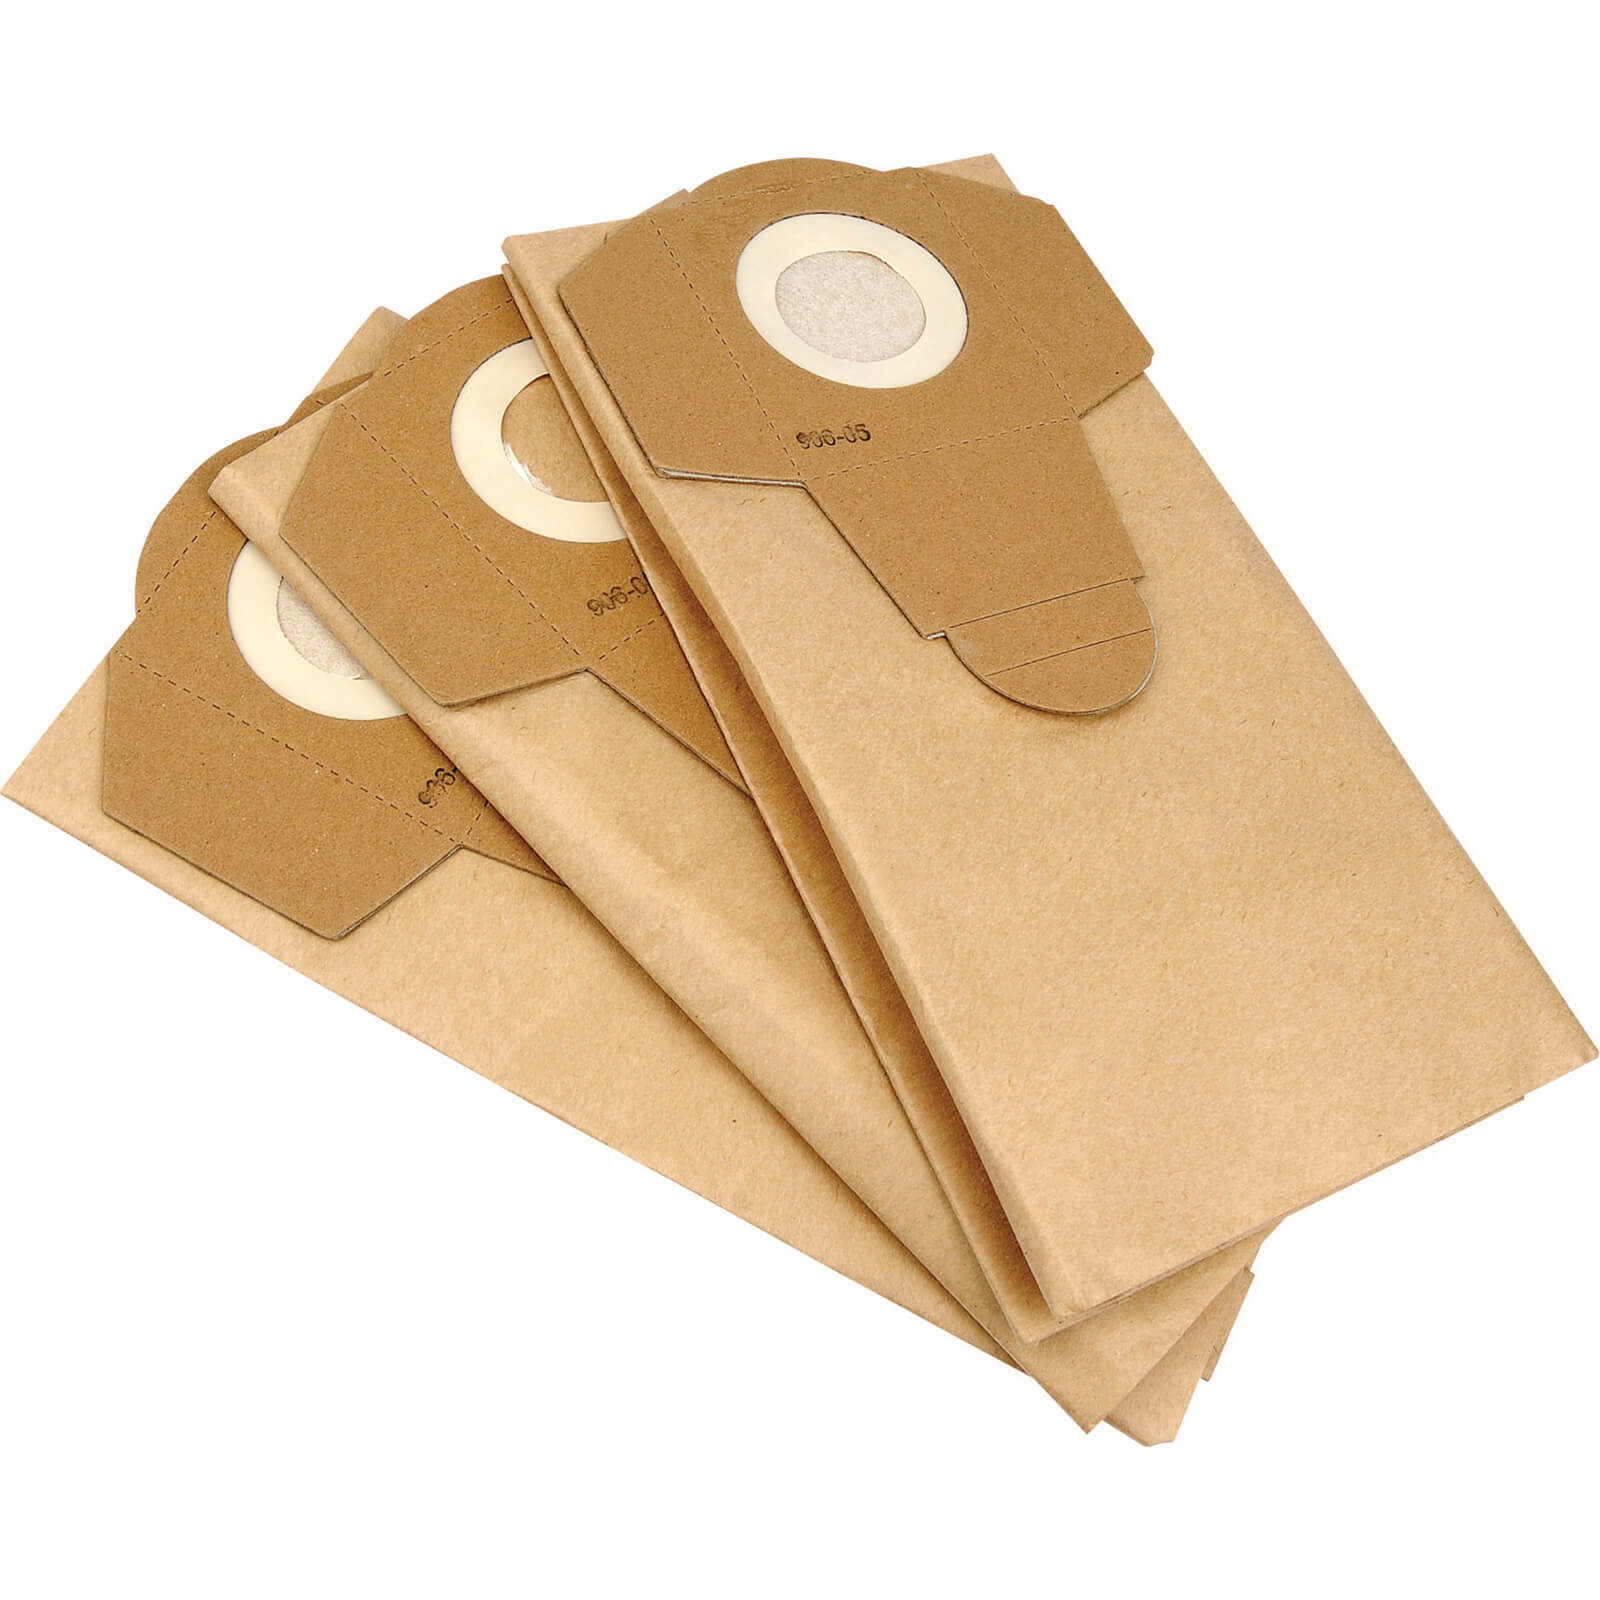 Image of Draper Paper Dust Bags for 13785 Vacuum Cleaner Pack of 3